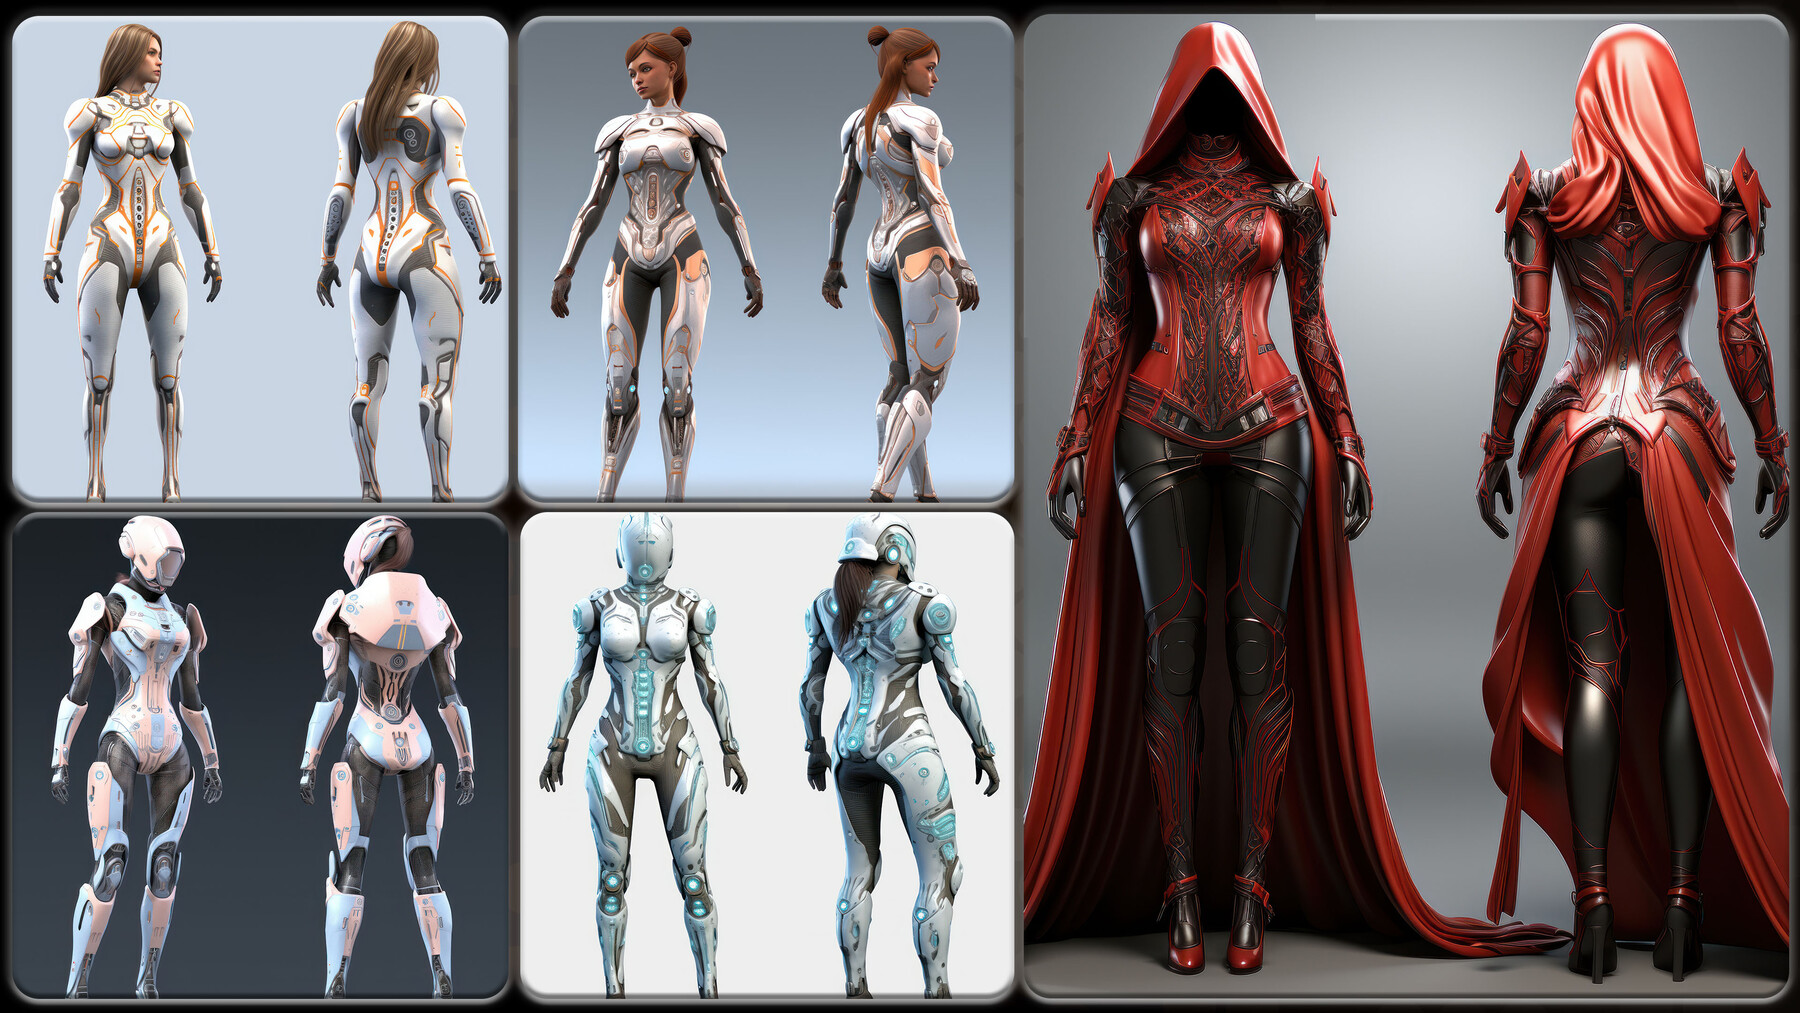 ArtStation - 450 Futuristic Female Outfit _ VOL 2 _ Character Reference